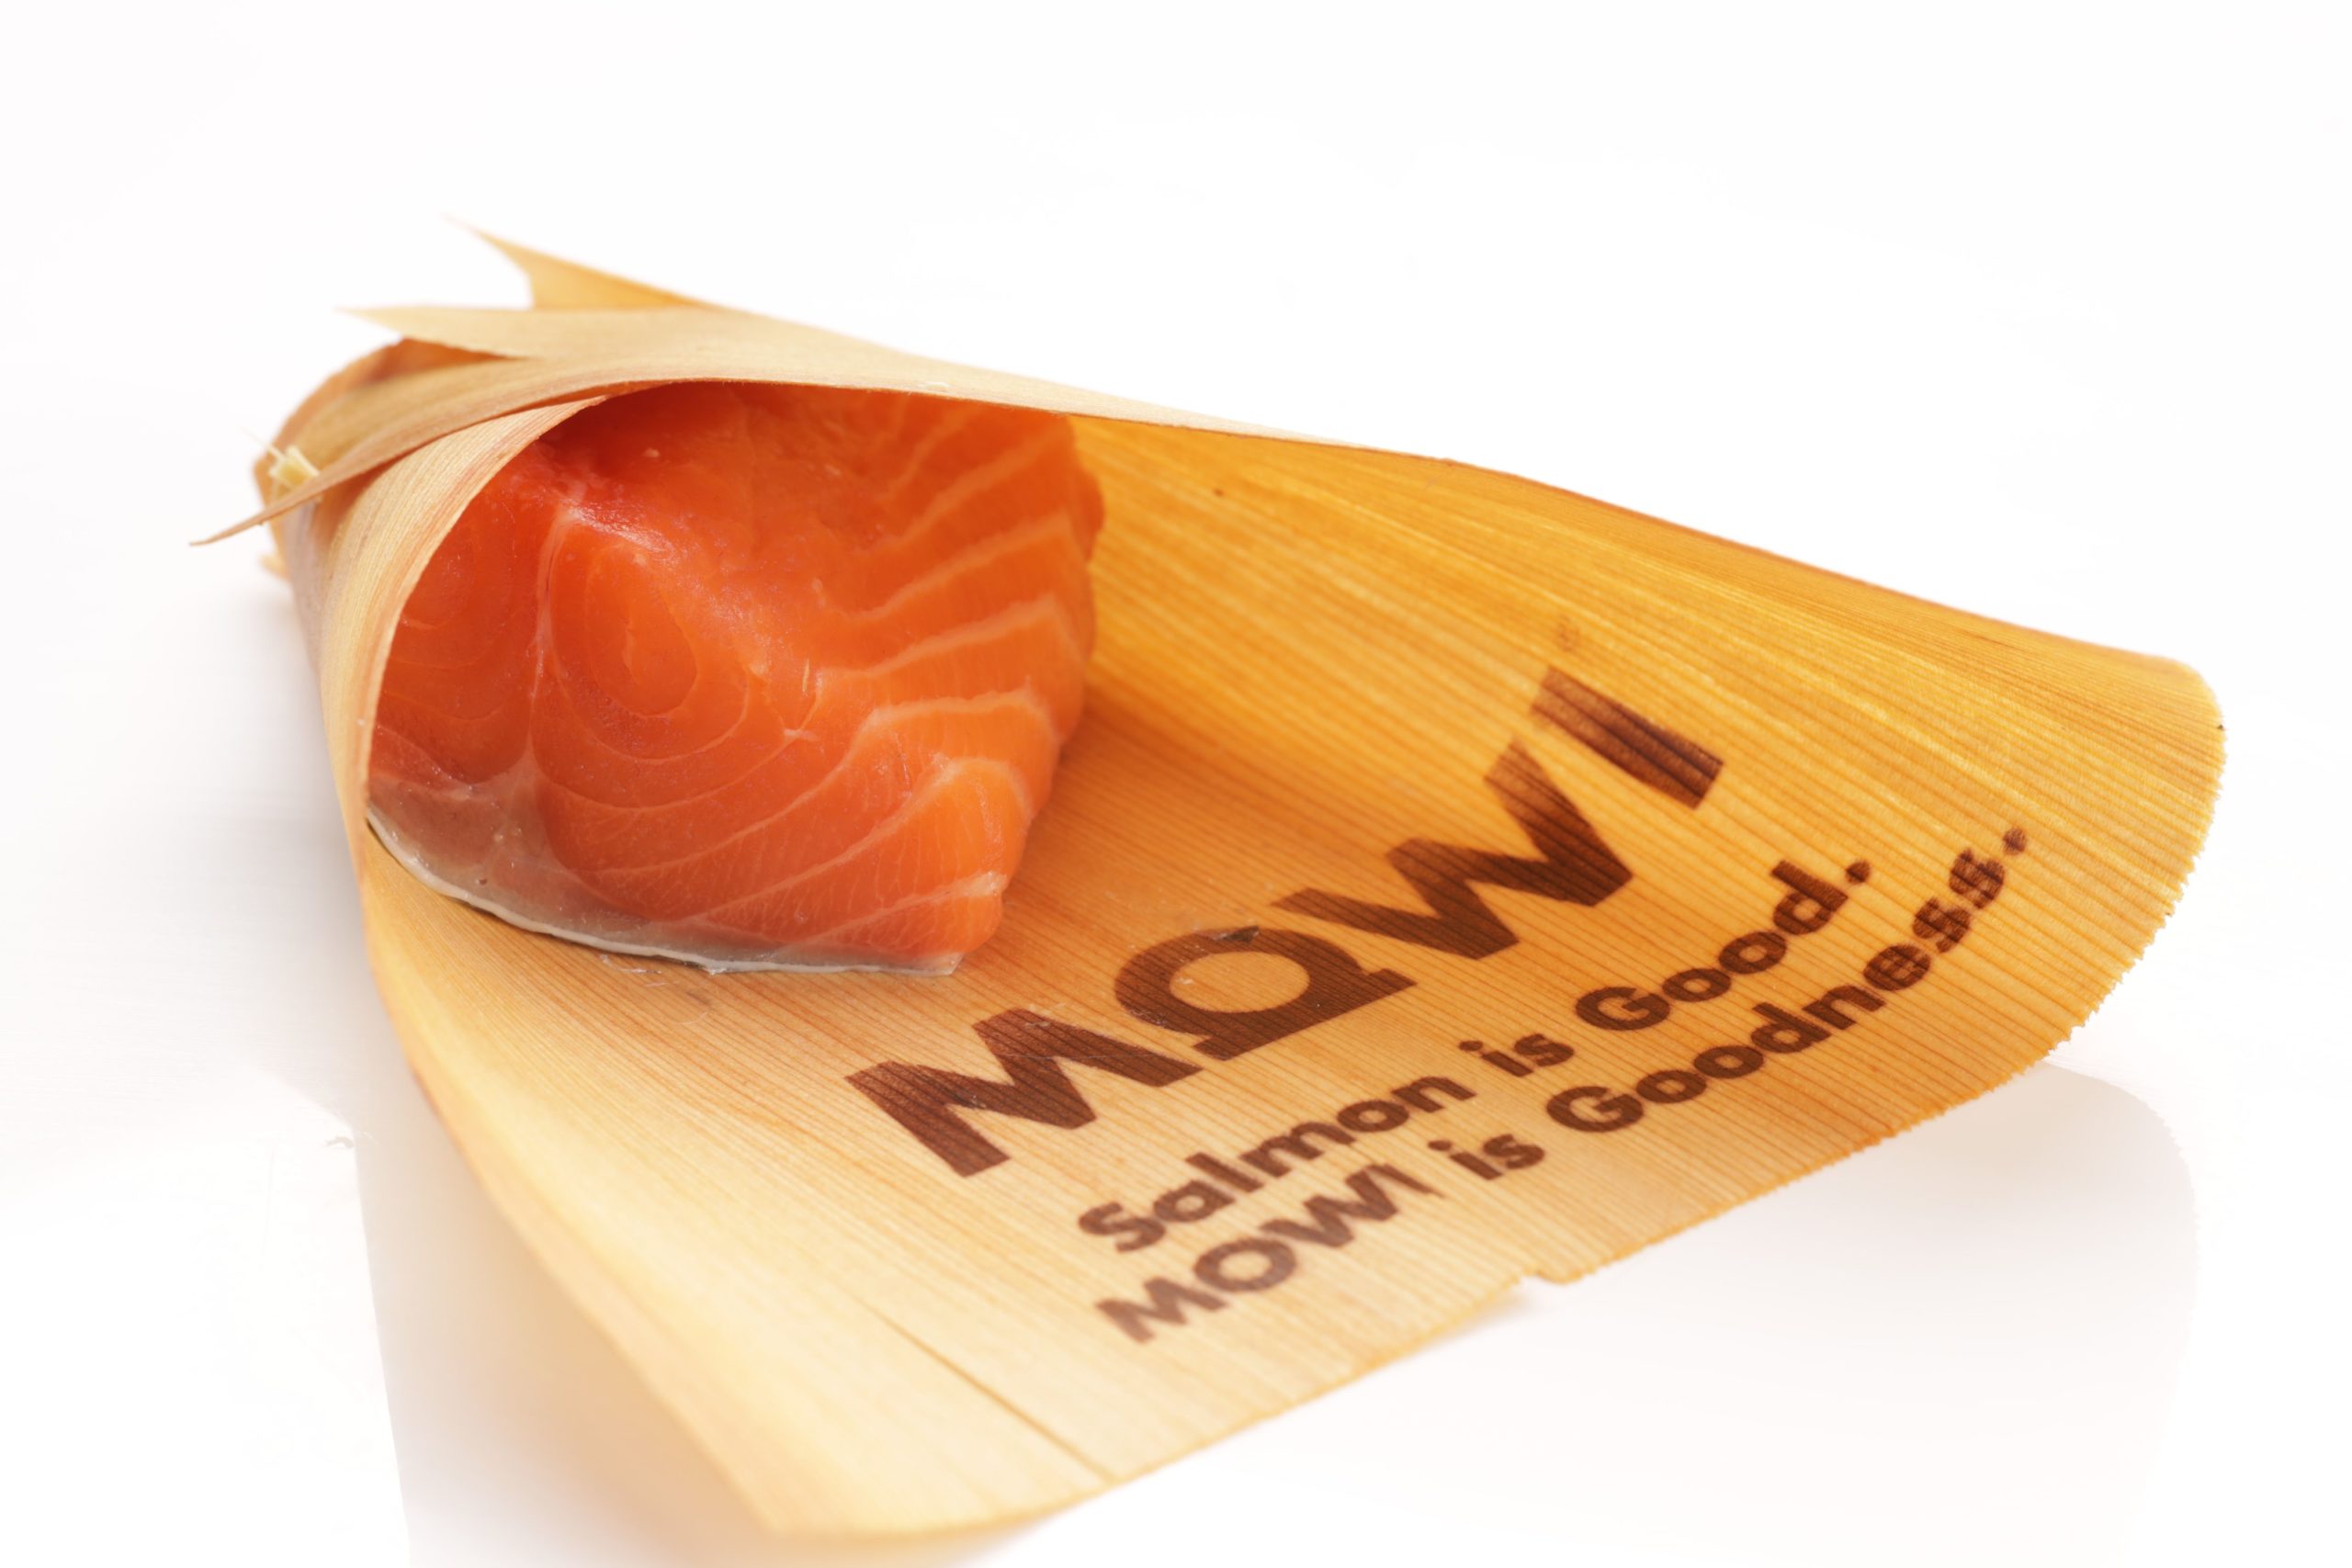 The MOWI Pure brand is 'chef quality salmon in unique, precision Japanese cuts' (photo: Mowi)